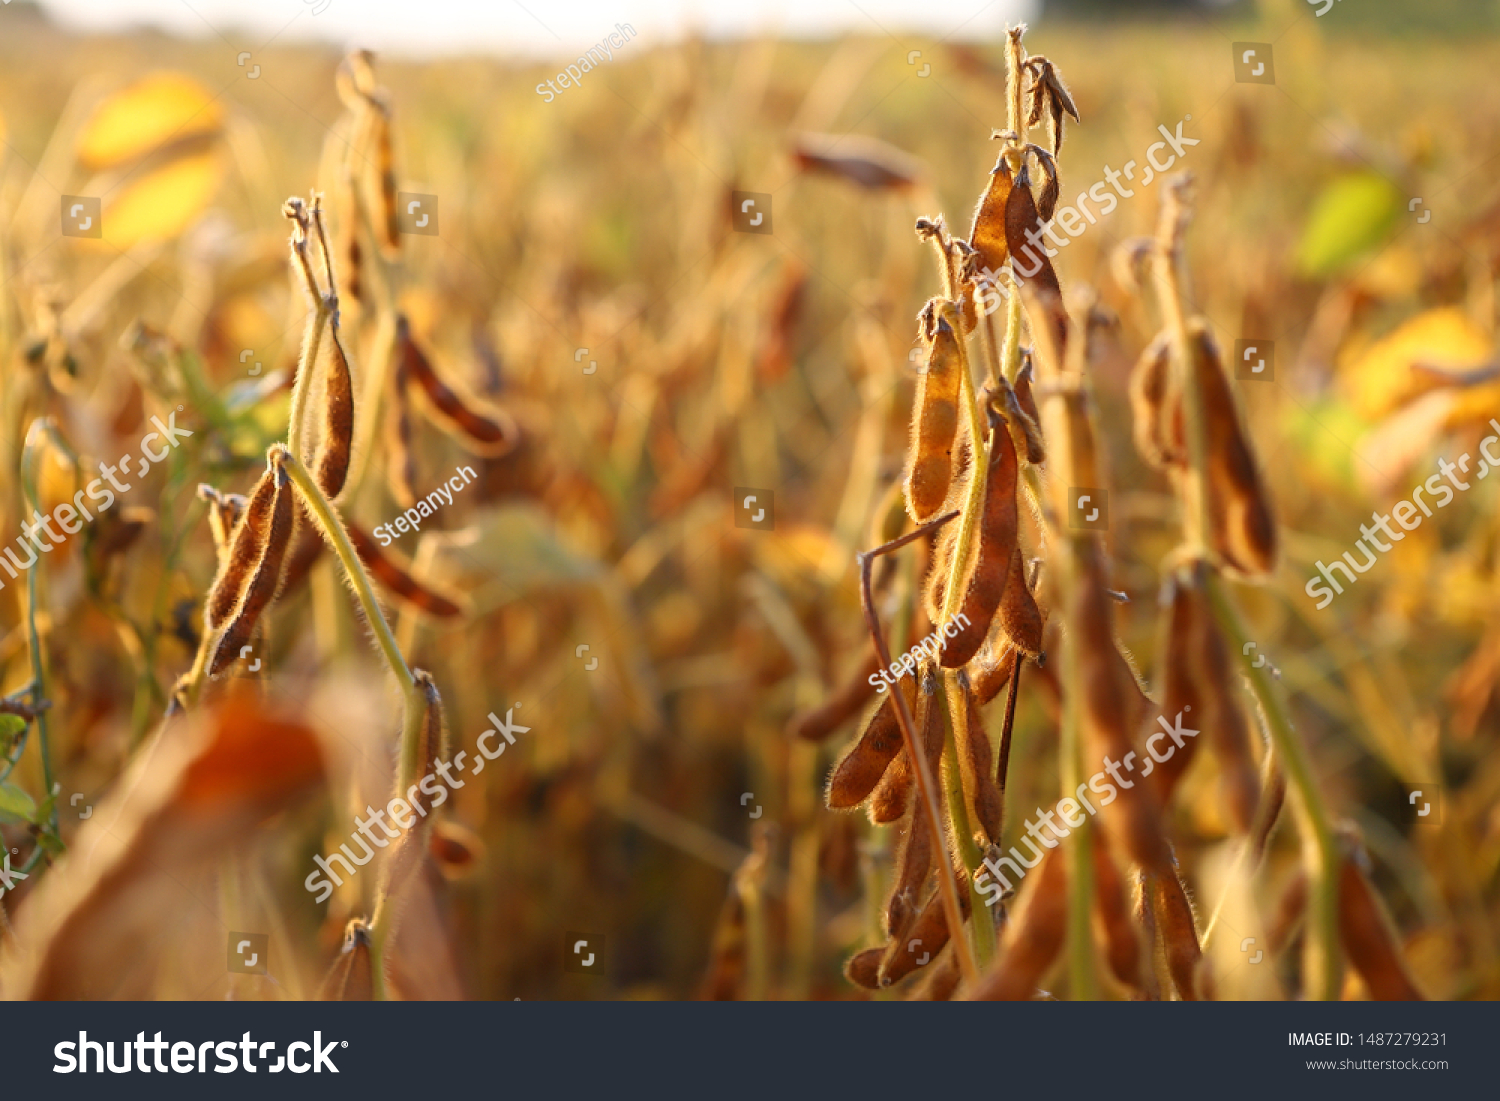 Ripe golden brown soybean on soybean plantation, at sunset, closeup. Soybean plant. Soy pods. Soybean field in golden glow #1487279231